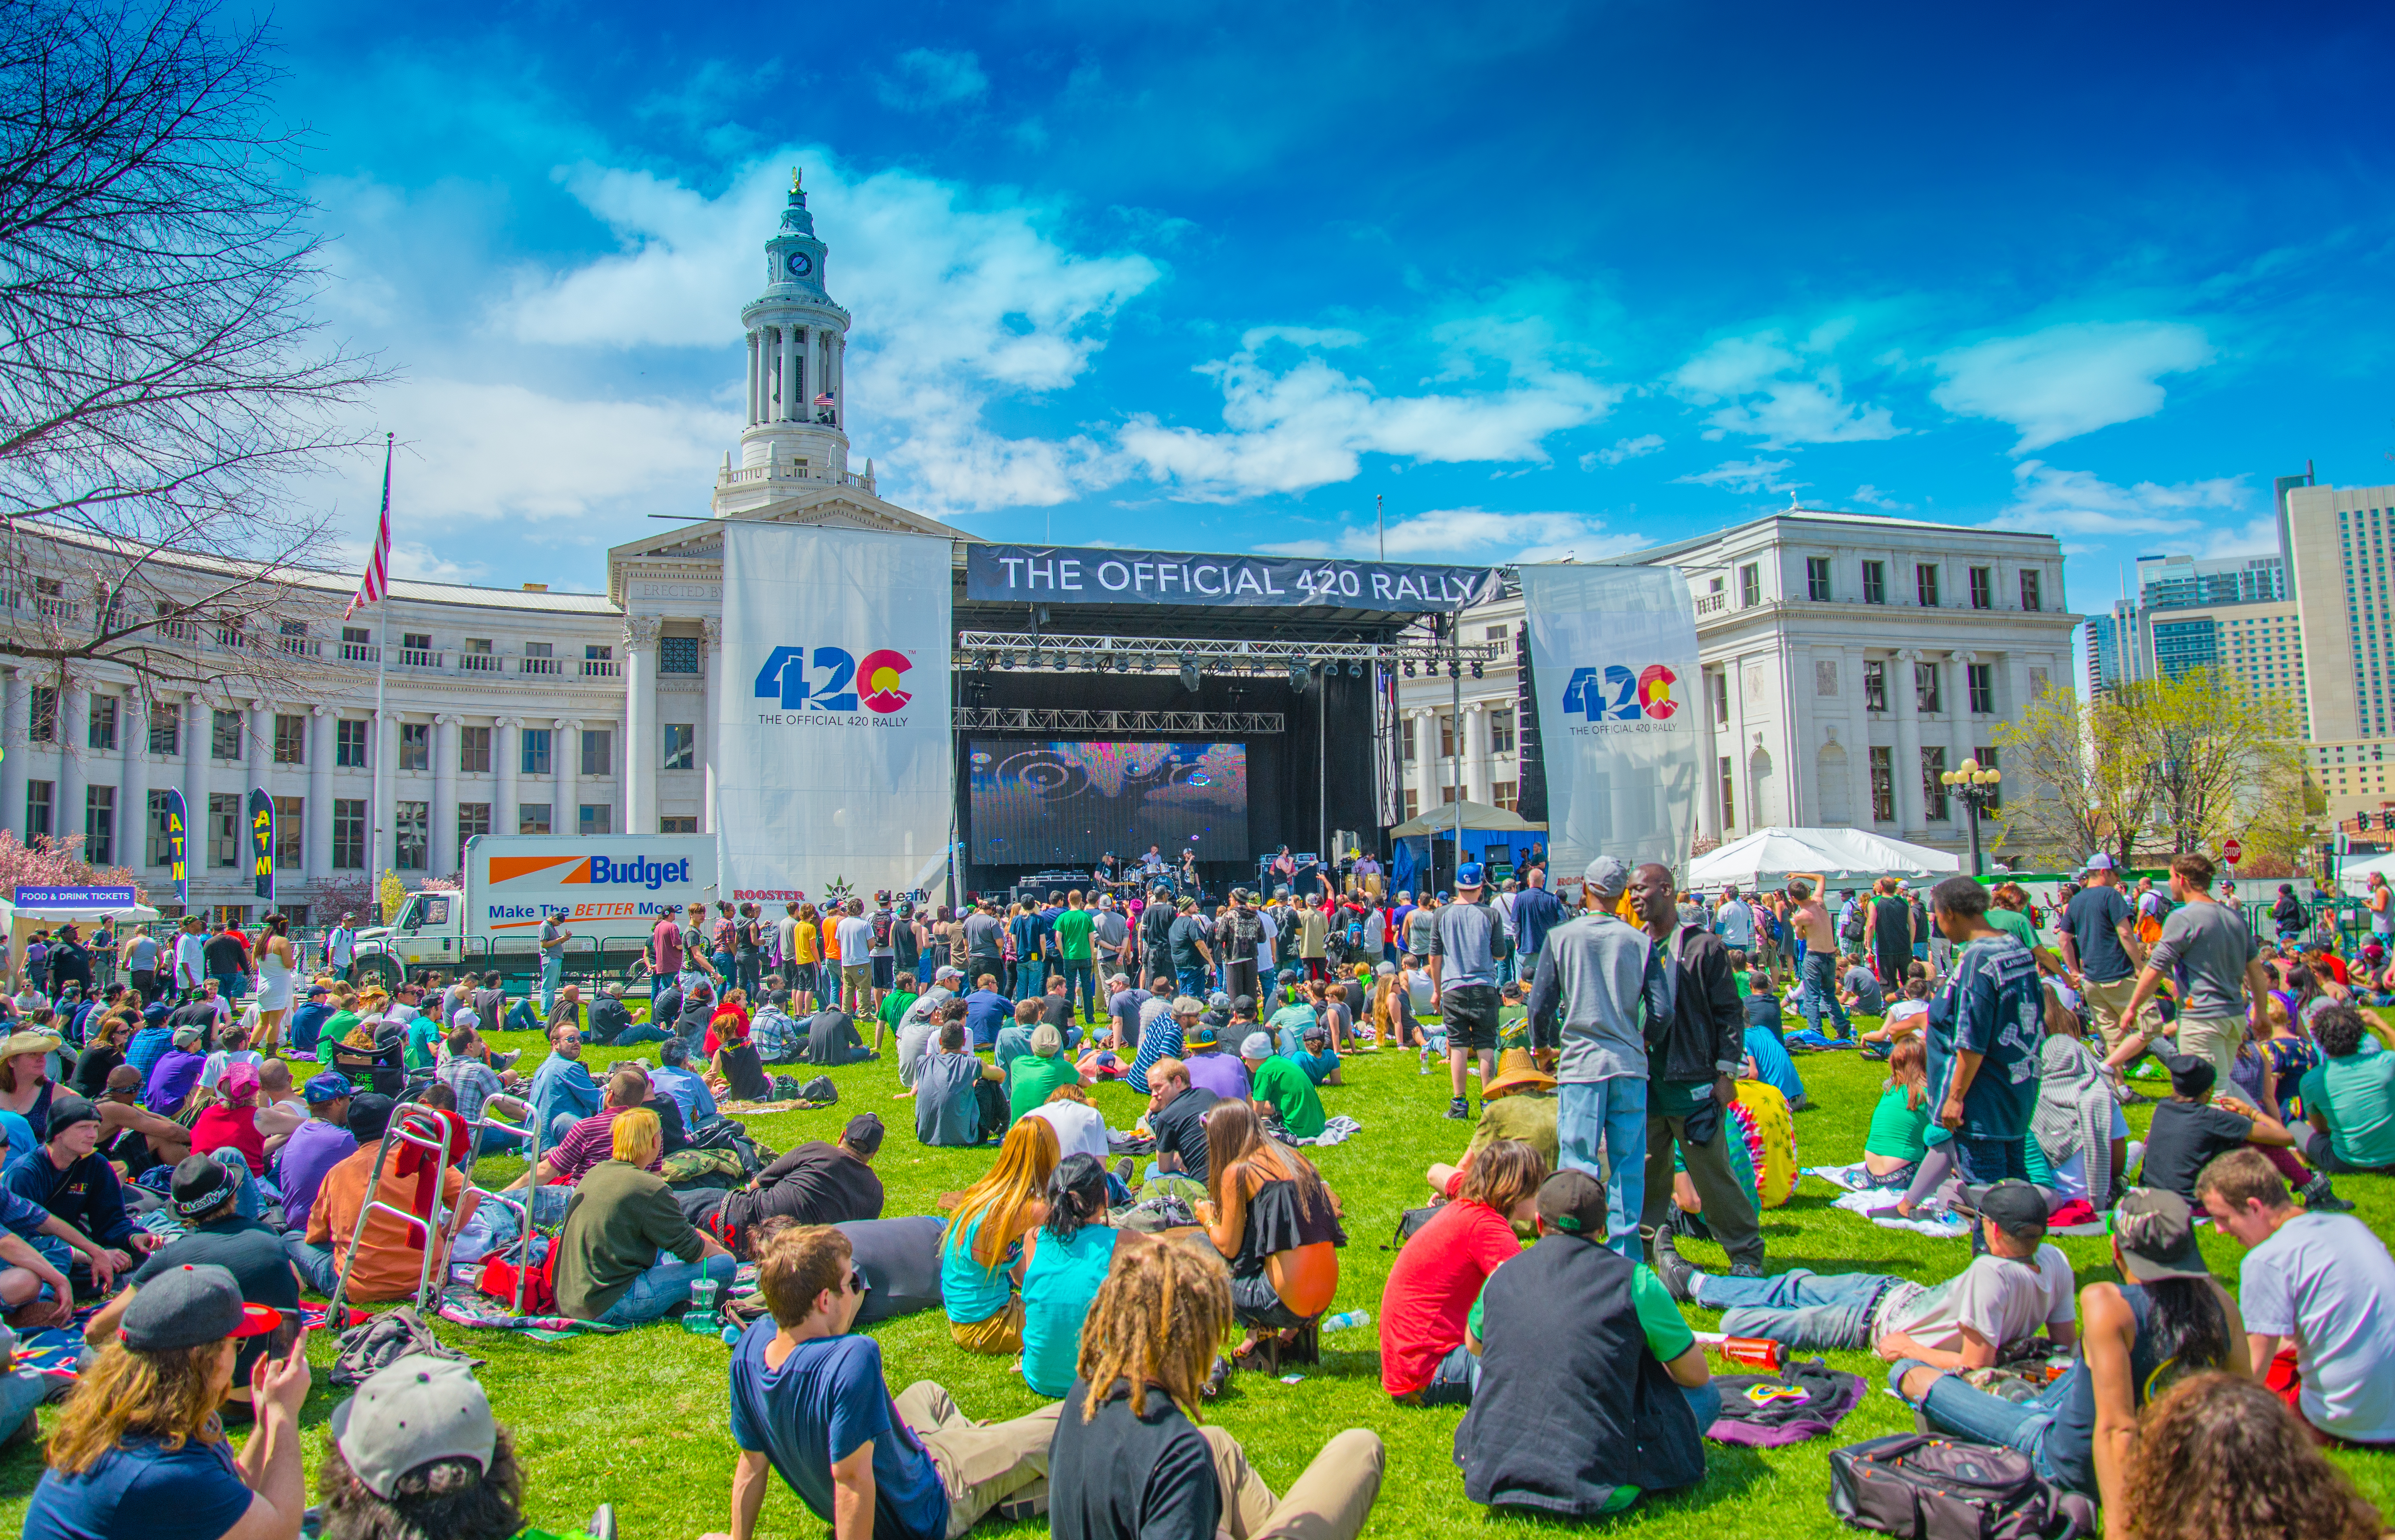 420 Rally, Denver Civic Center Park 2014 Official Main Stage. Image ©Fara Paige